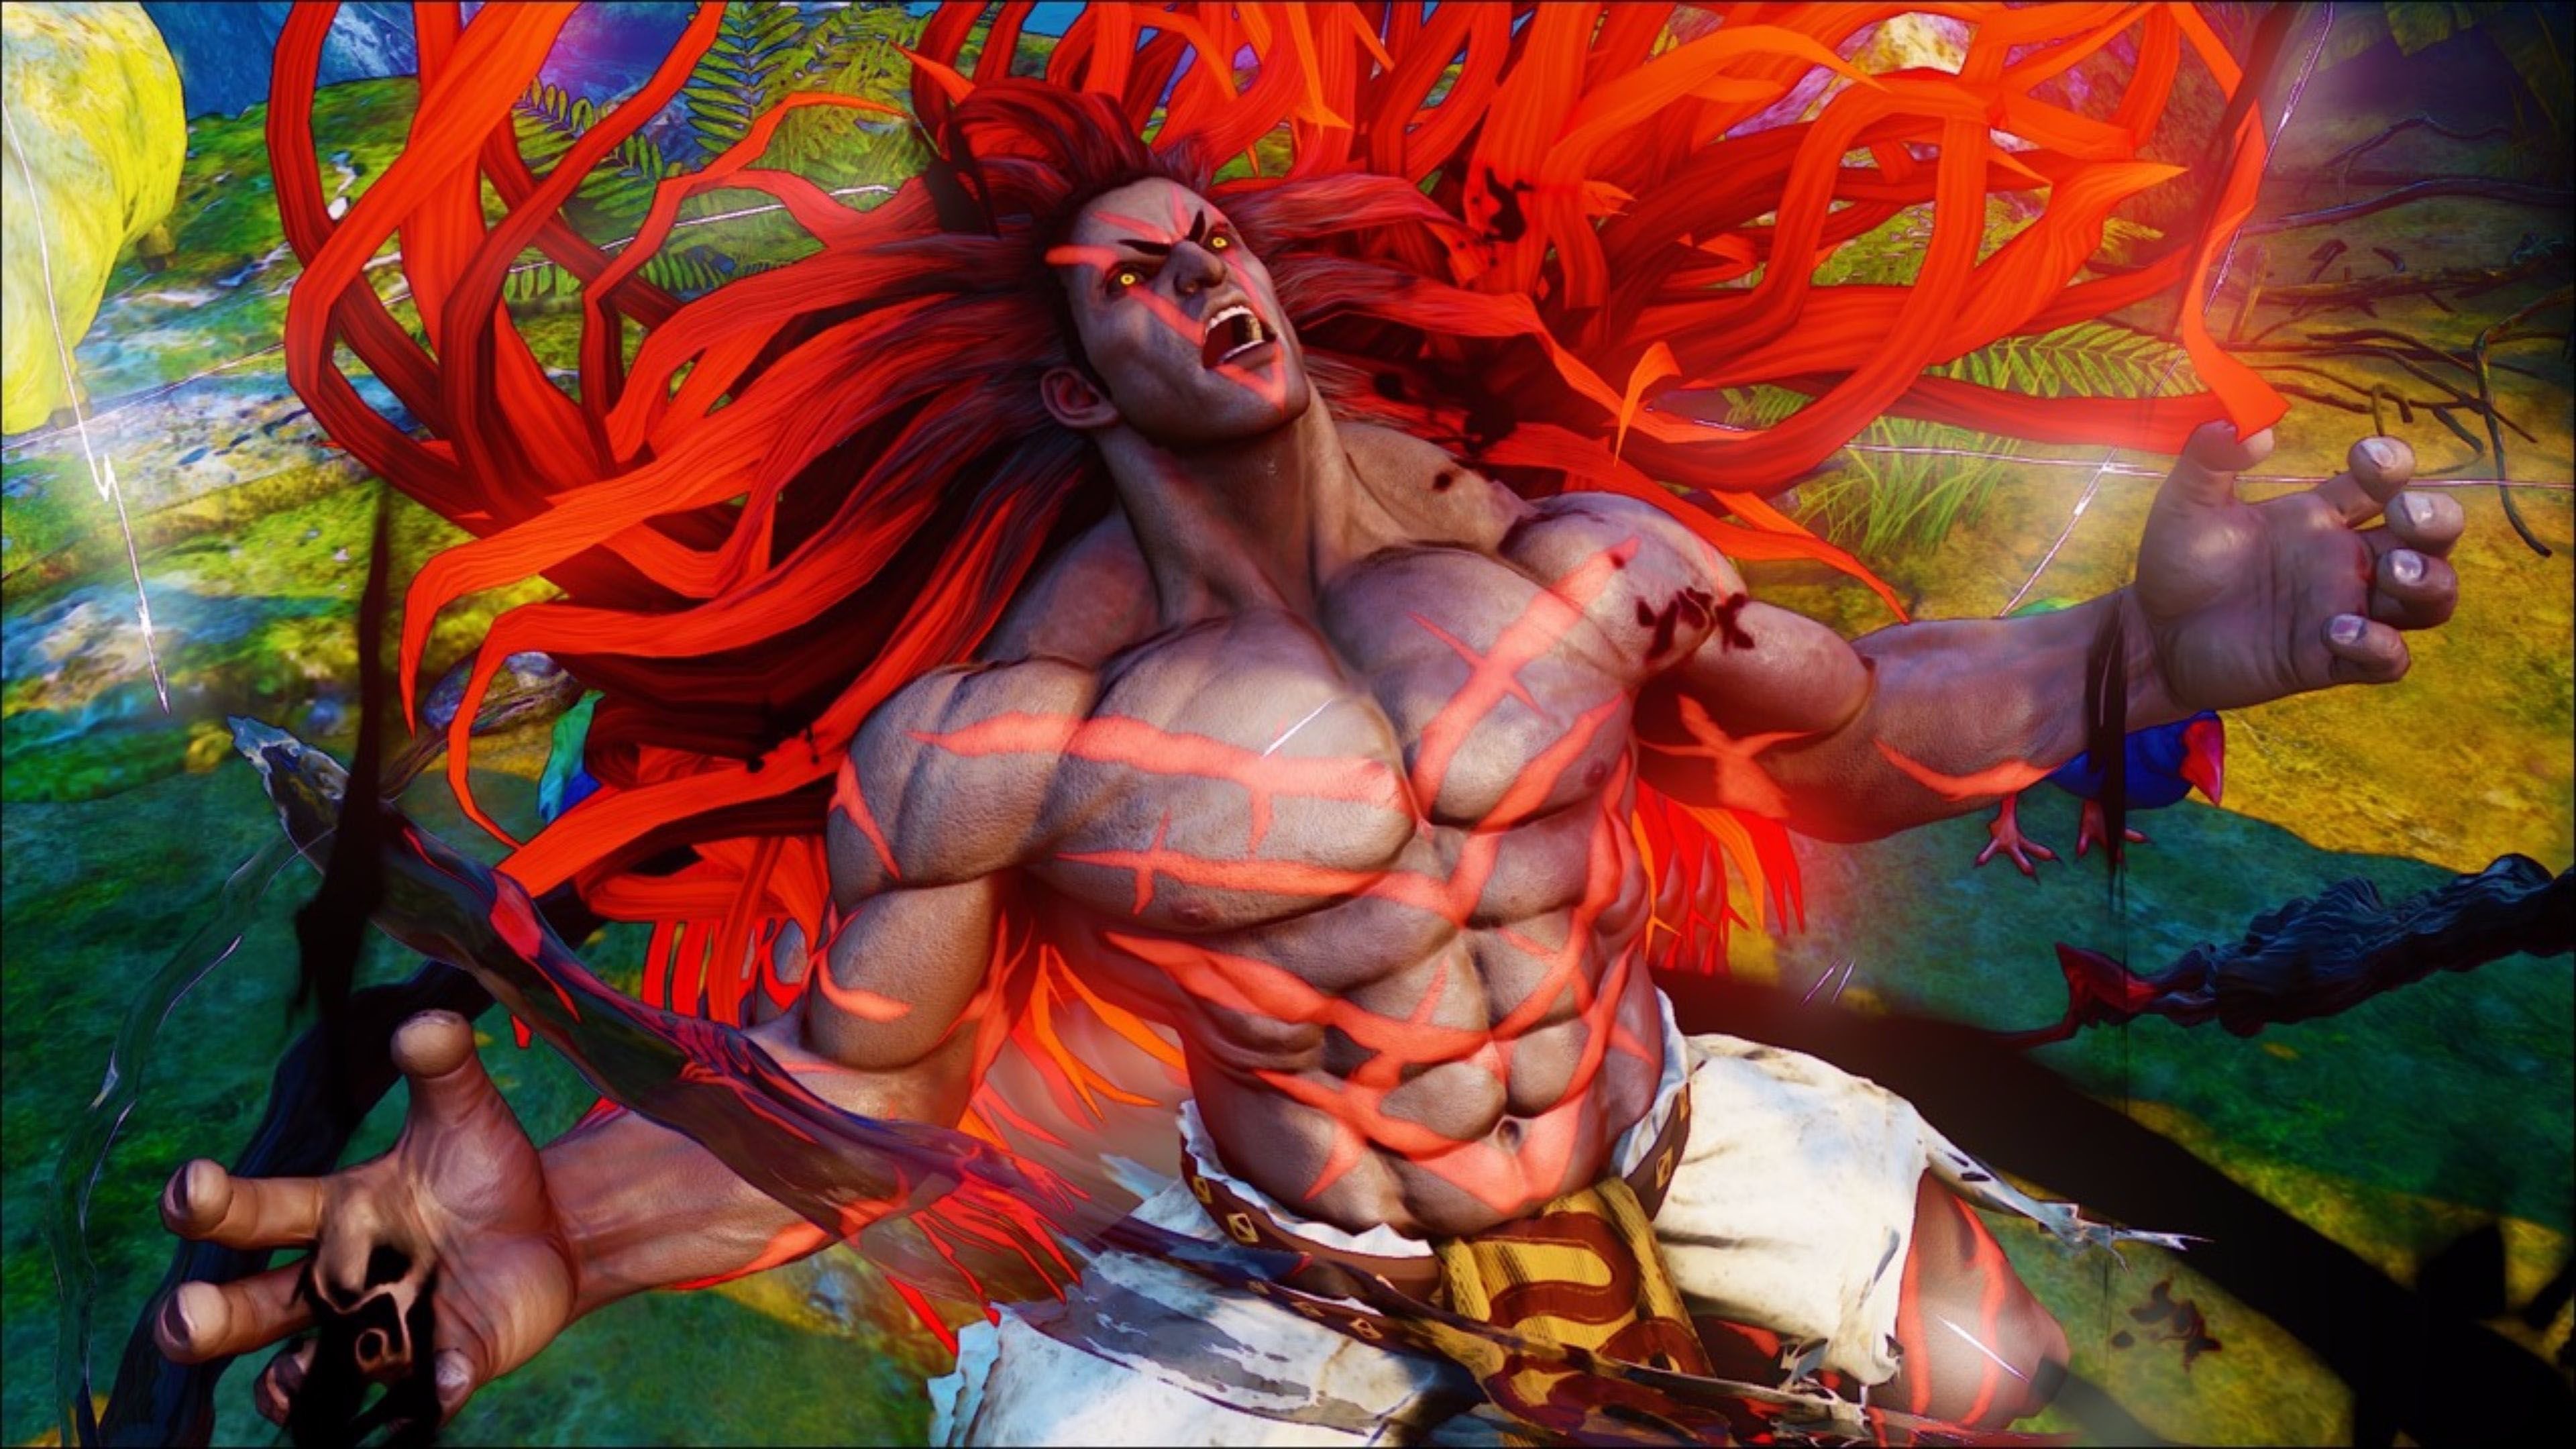 Necalli from the Street Fighter Series